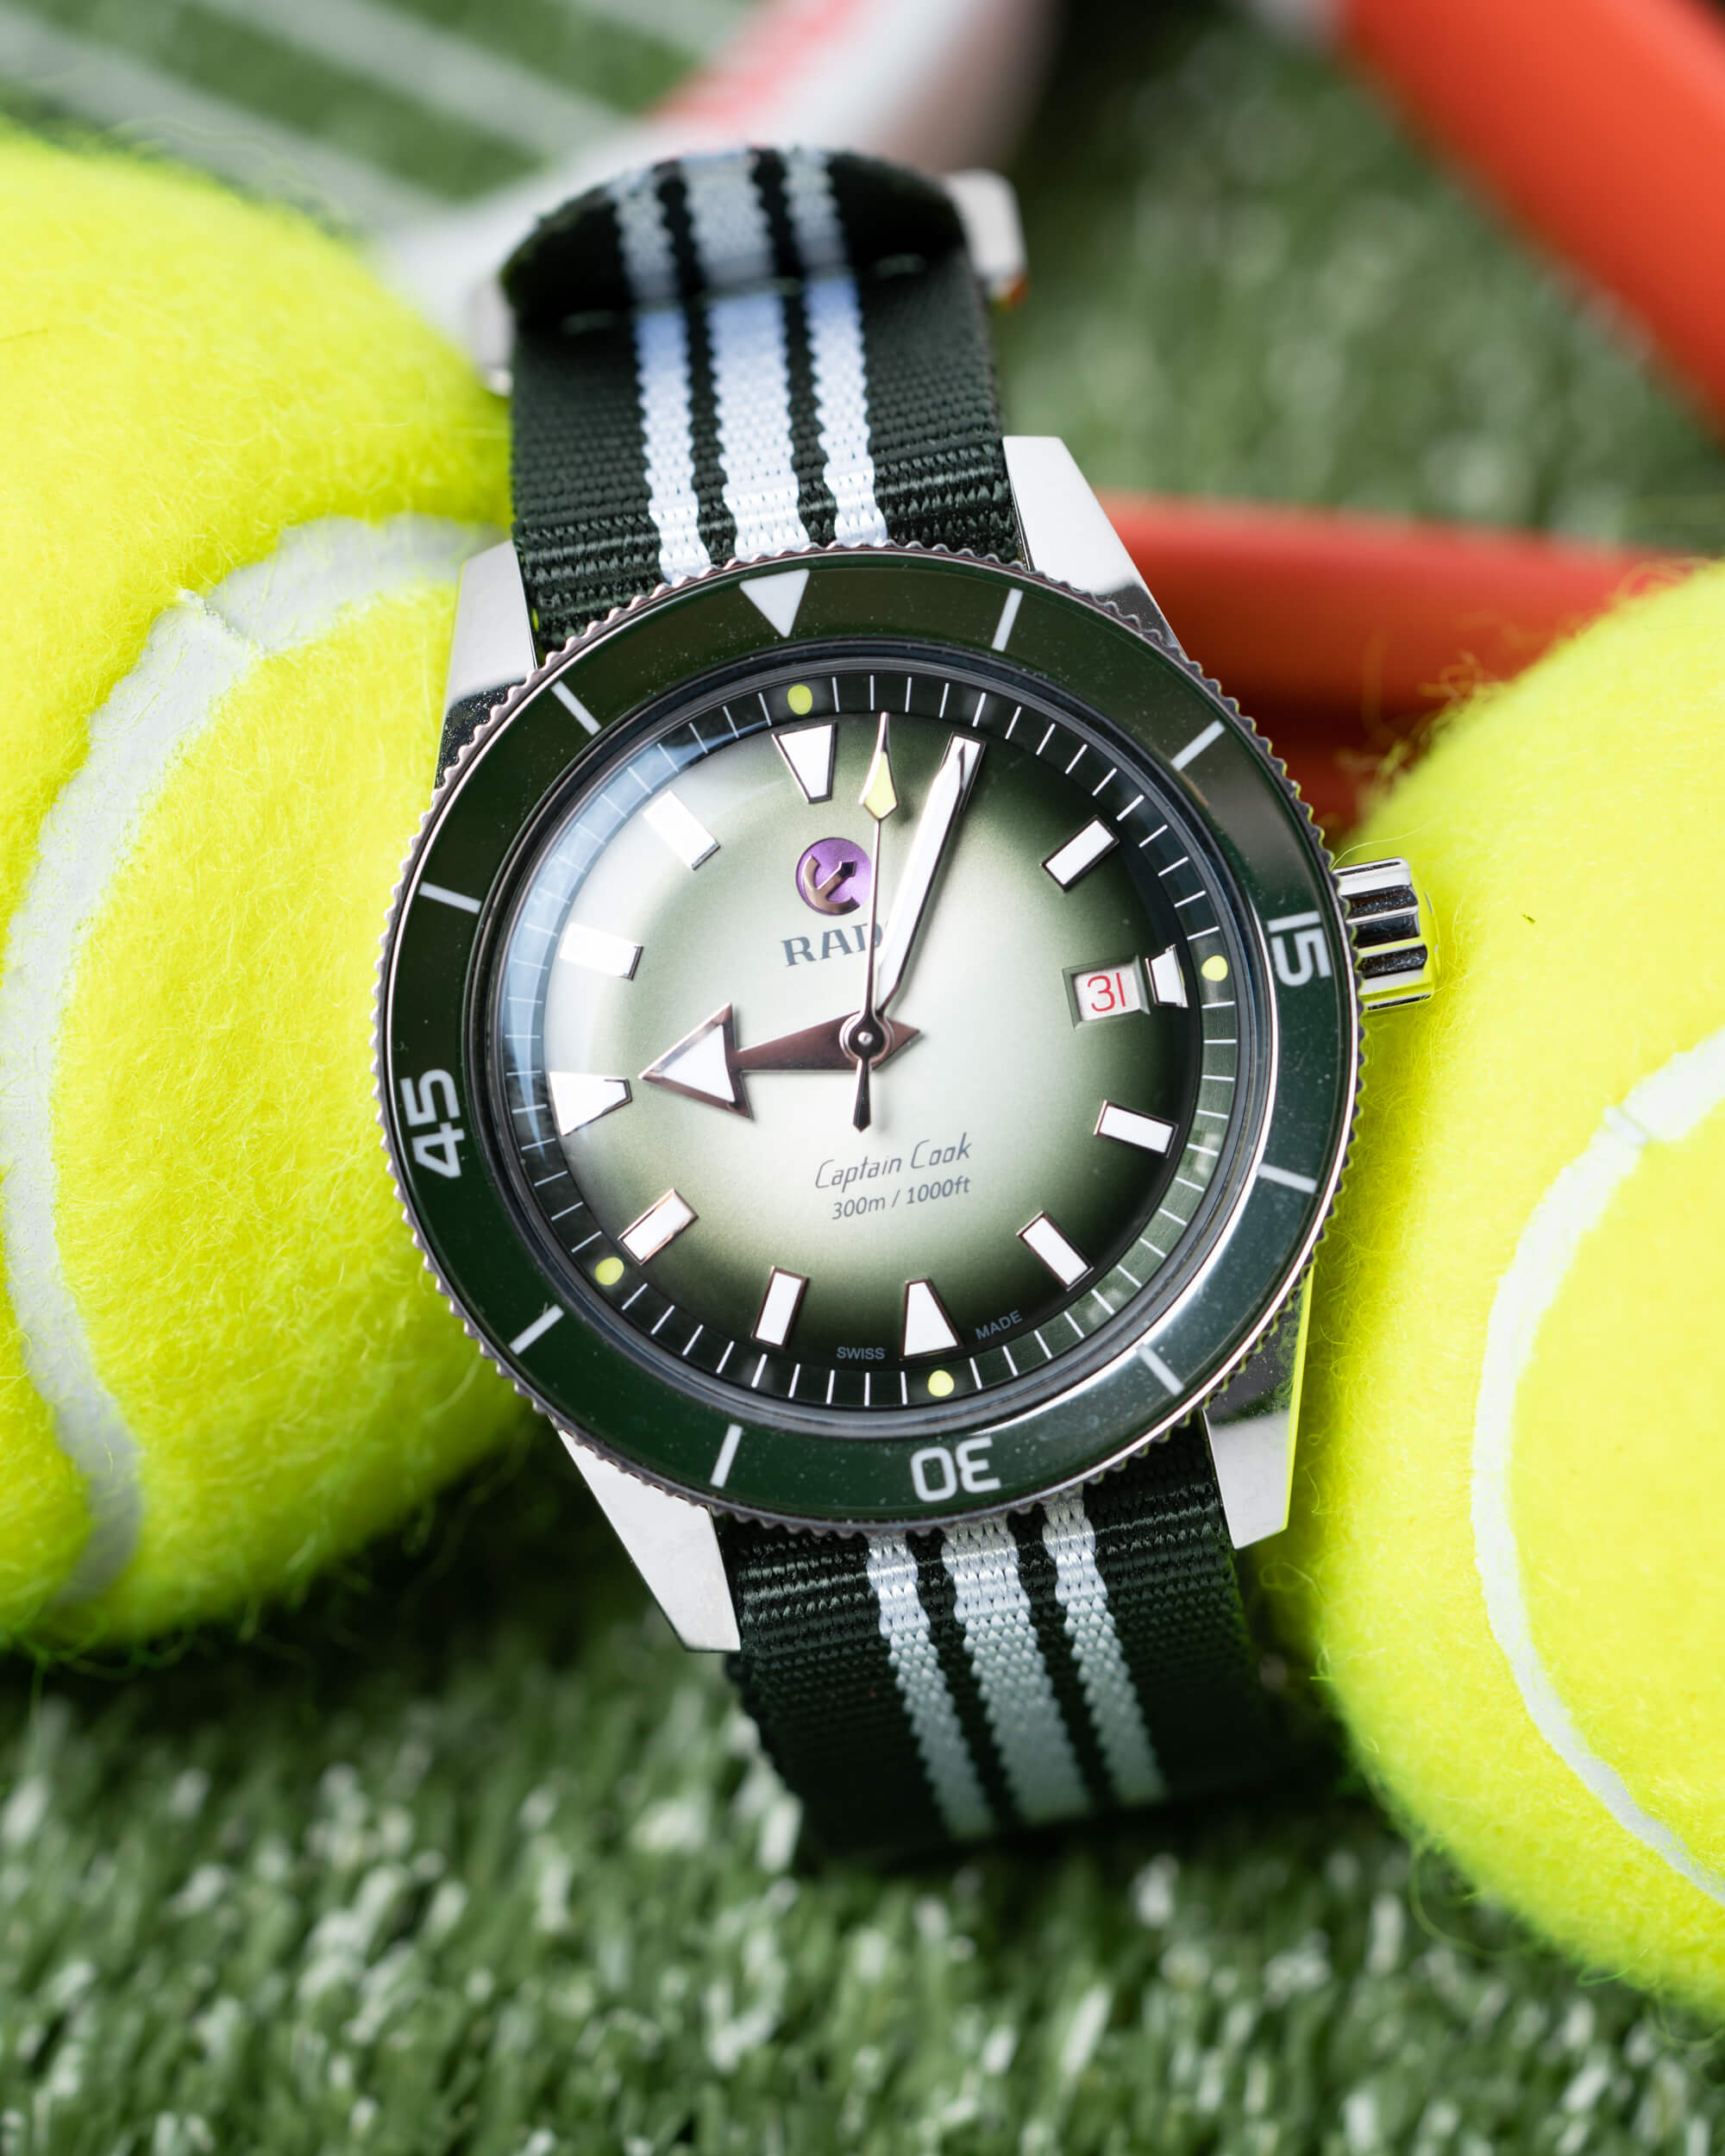 Watch Review At The Citi Open With The Rado Captain Cook x Cameron Norrie Limited Edition aBlogtoWatch